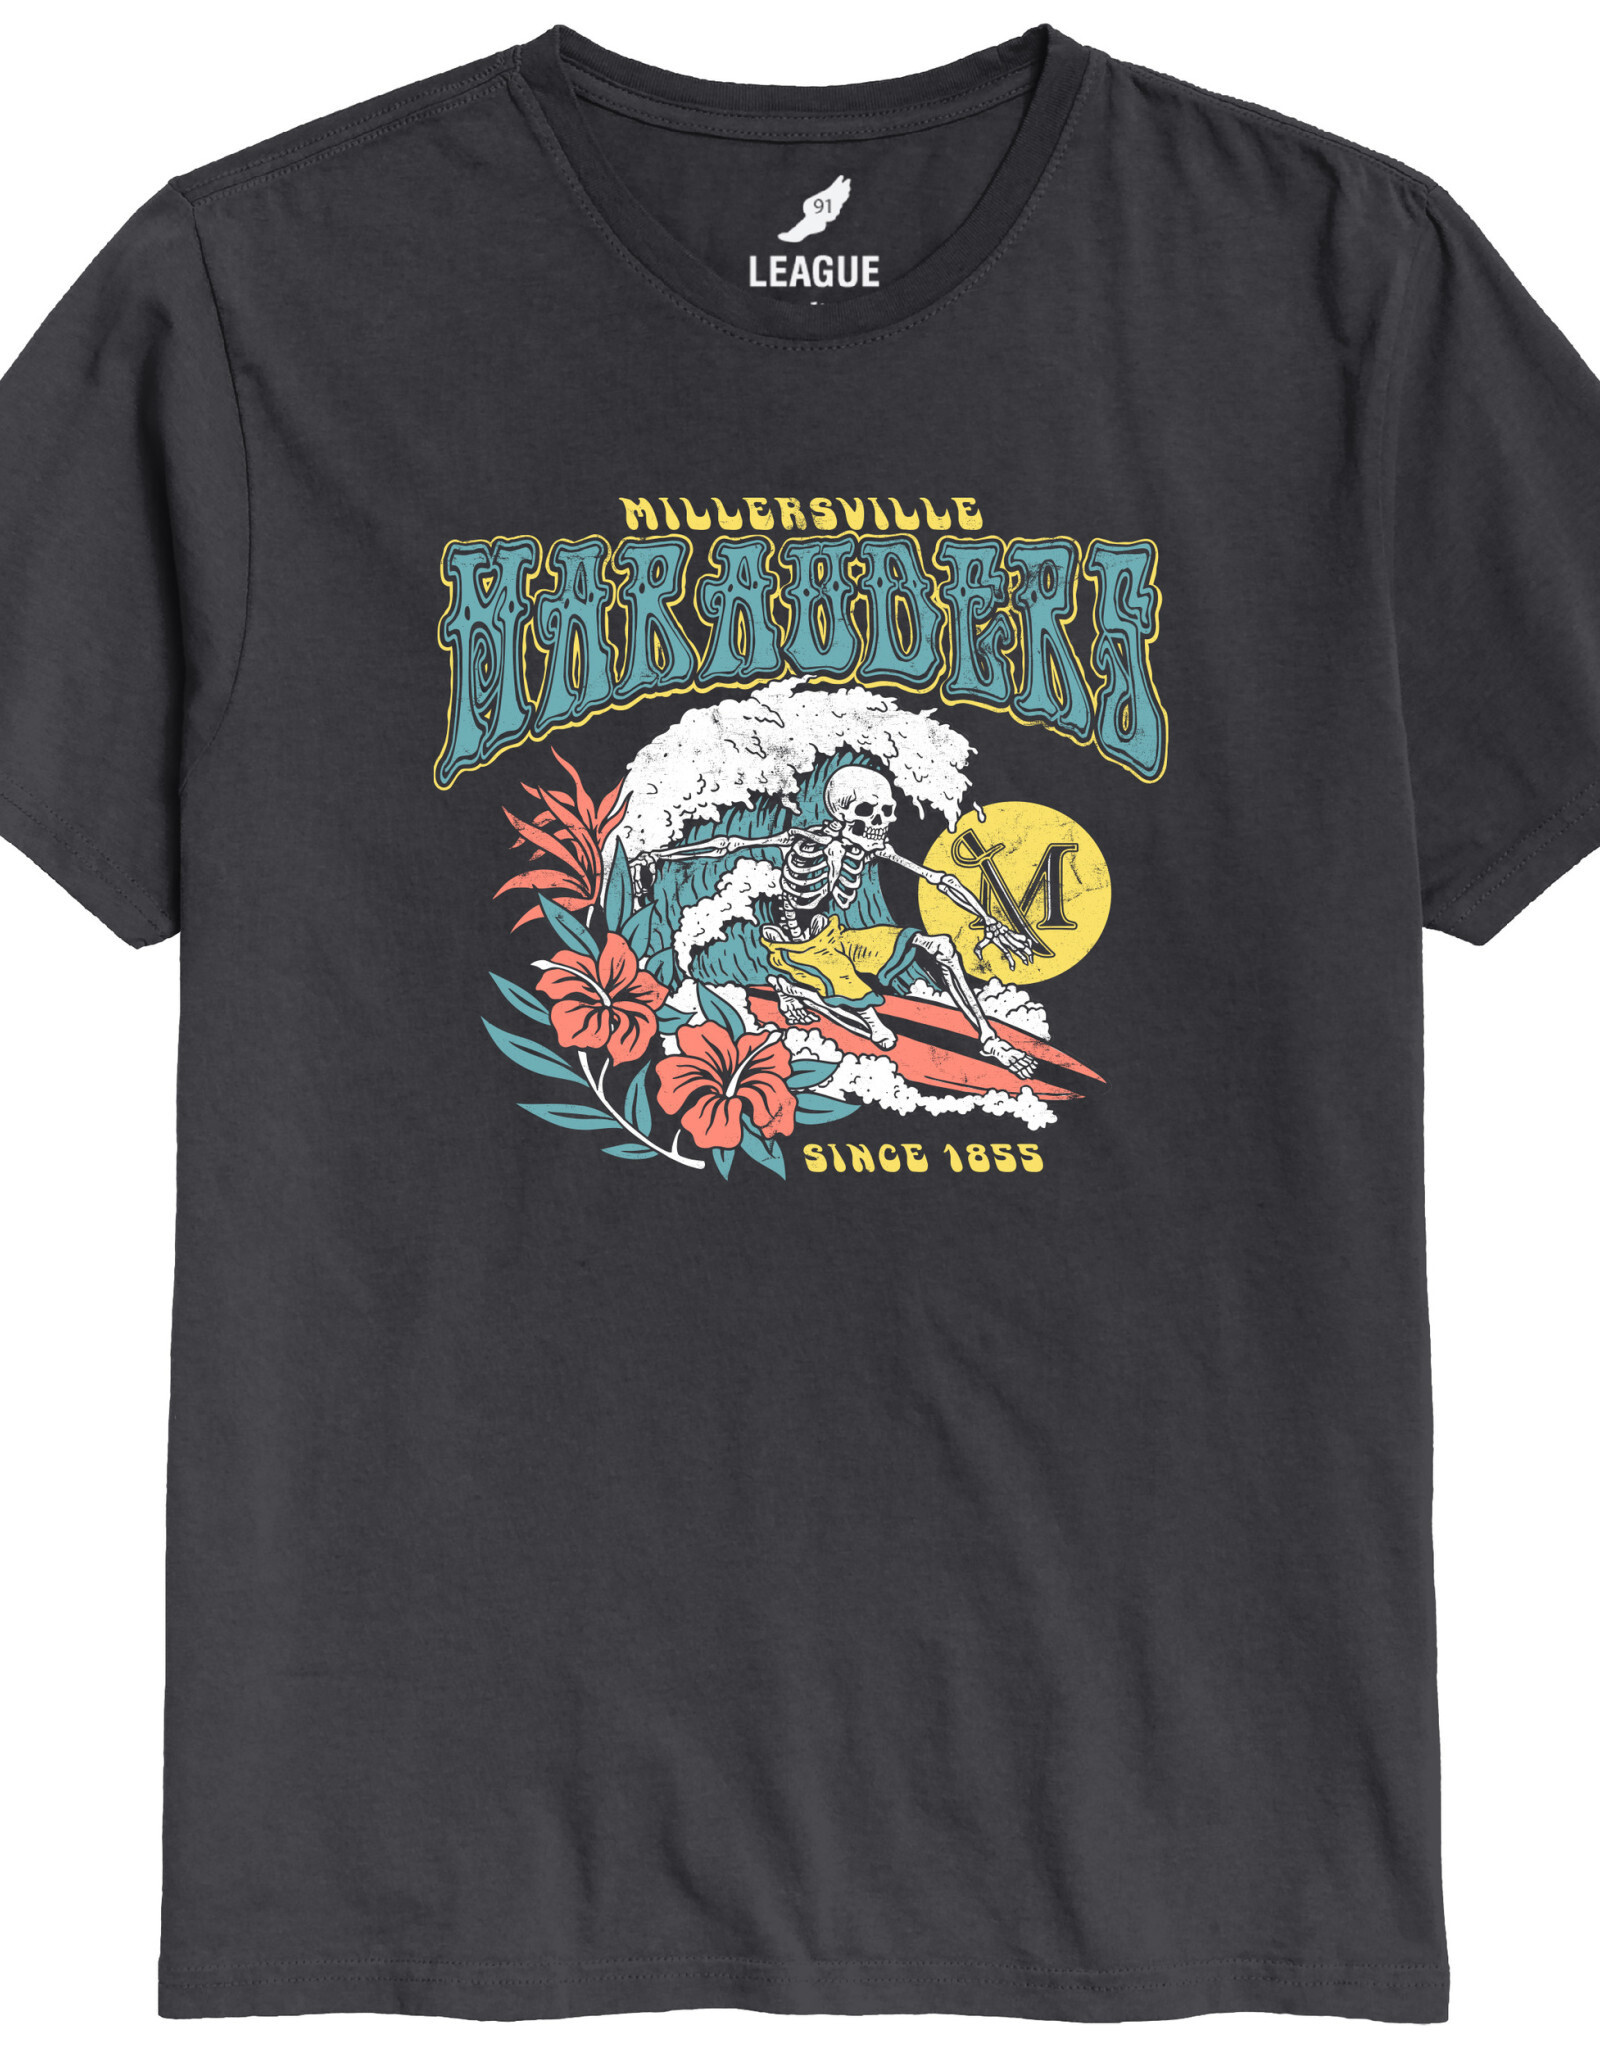 League Permanent Vacation Tee